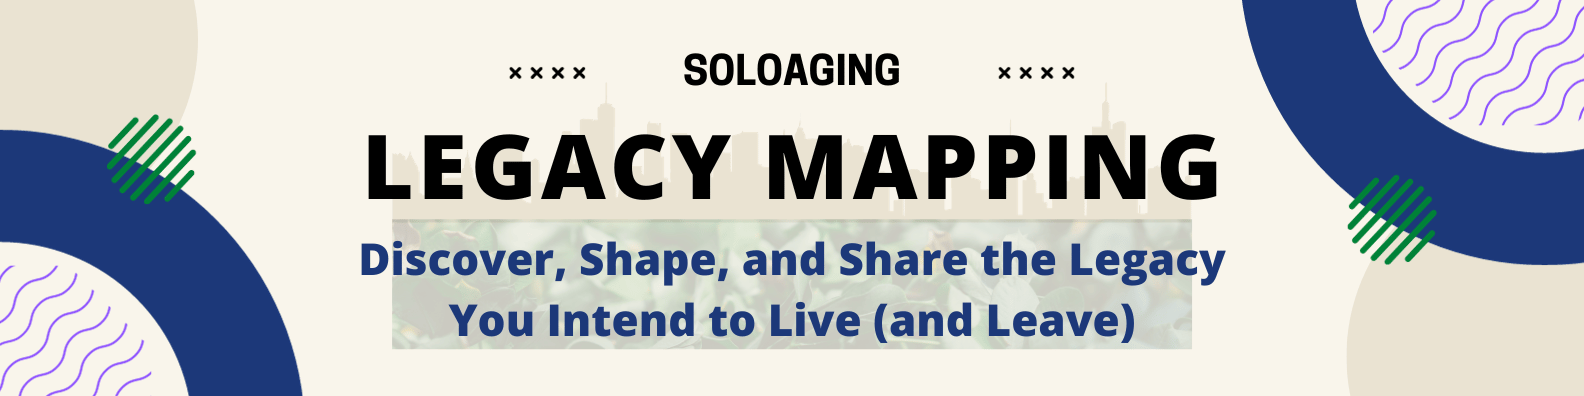 Legacy Mapping